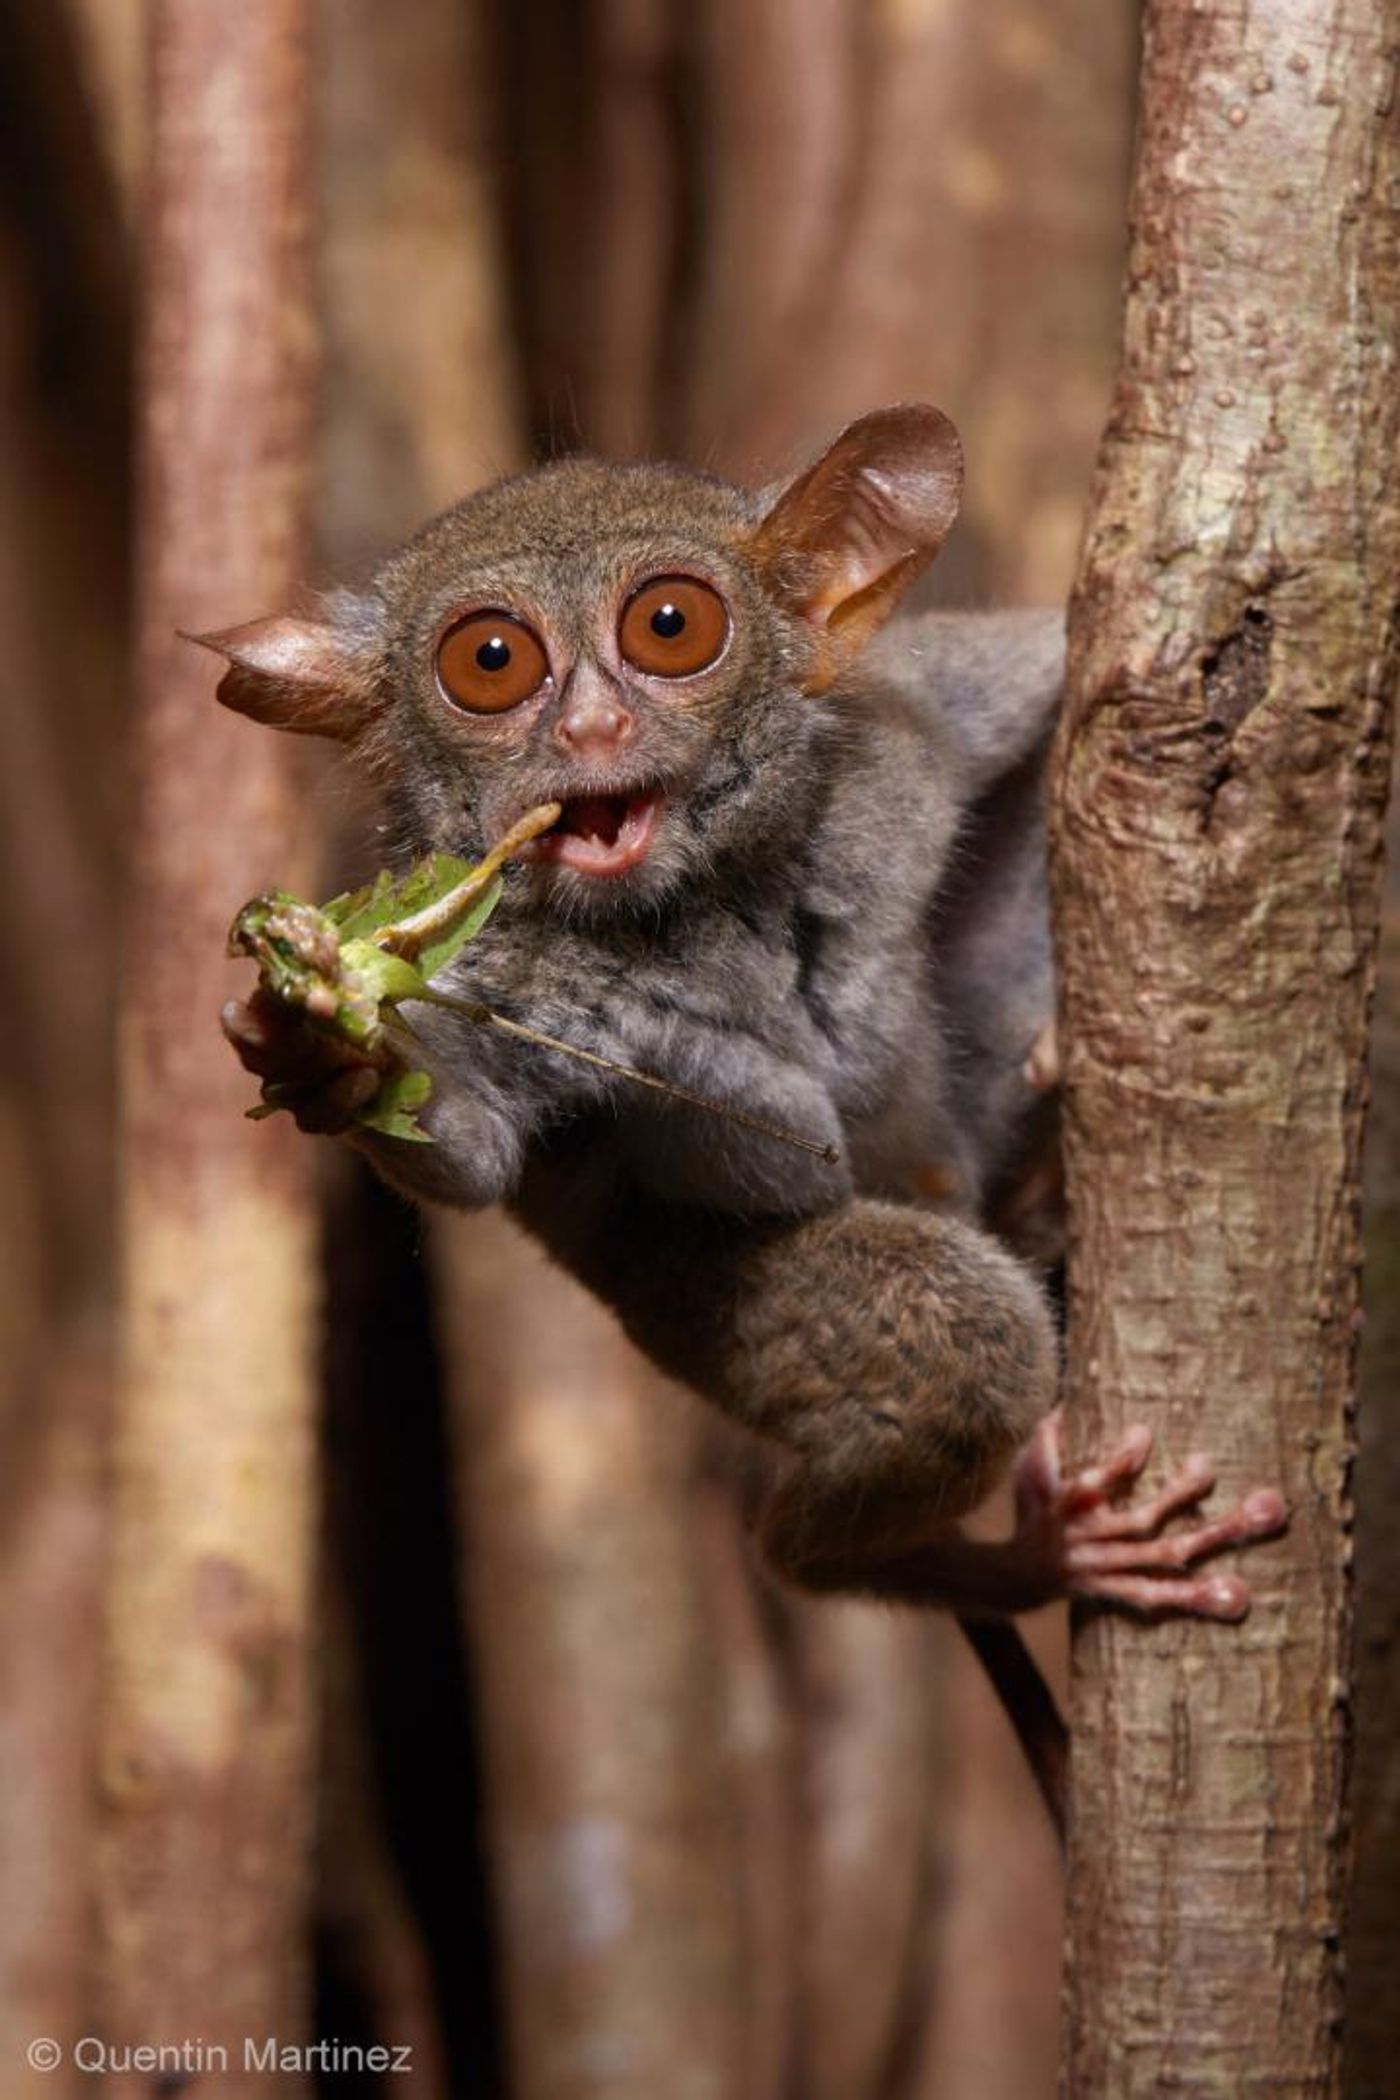 A spectral tarsier (Tarsius tarsier) feeding on a grasshopper in Tangkoko National Park, Northern Sulawesi, Indonesia. Tarsiers have five chitinase genes to digest the high amount of chitin in their insectivorous diet, which likely represents the ancestral condition of all placental animals, including humans. Copyright/Credit: Quentin Martinez